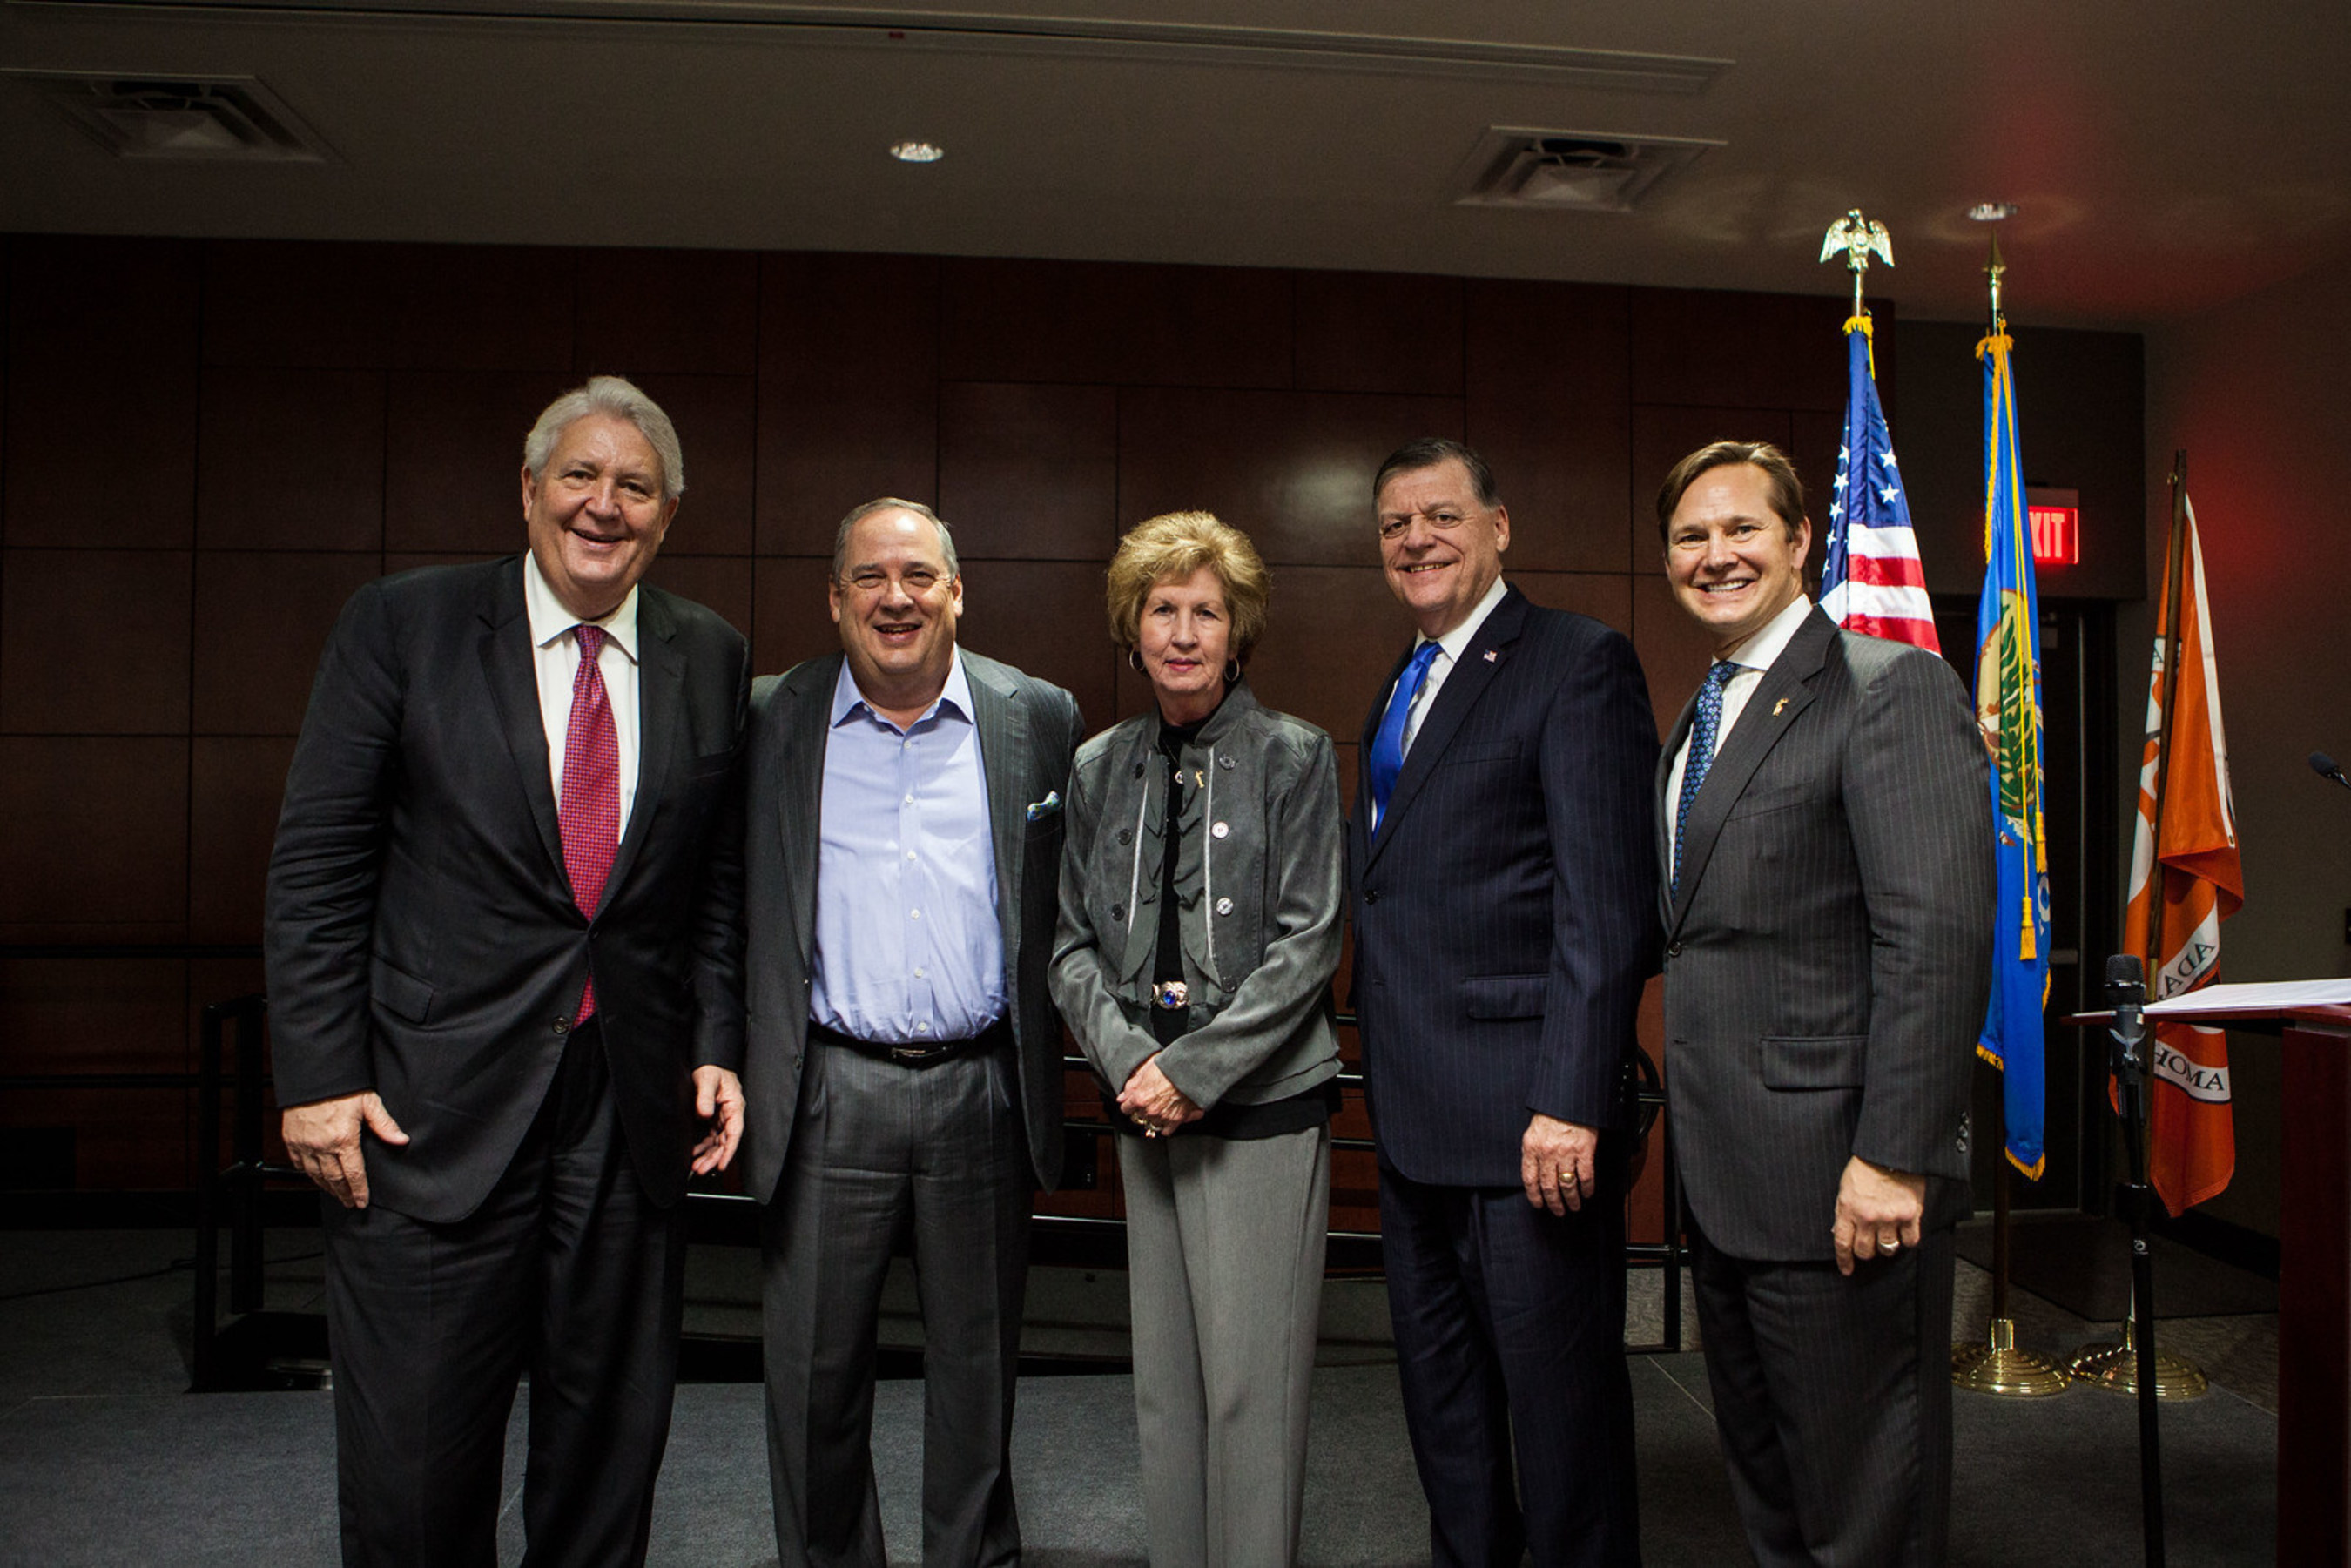 From left to right: Mike Turpen, former Oklahoma state Attorney General and current partner in the law firm Riggs, Abney, Neal, Turpen, Orbison, and Lewis; John Addison, CEO Primerica and LegalShield Board Member; Shirley Stonecipher, Harland Stonecipher's wife; Congressman Tom Cole; and Jeff Bell, CEO of LegalShield.